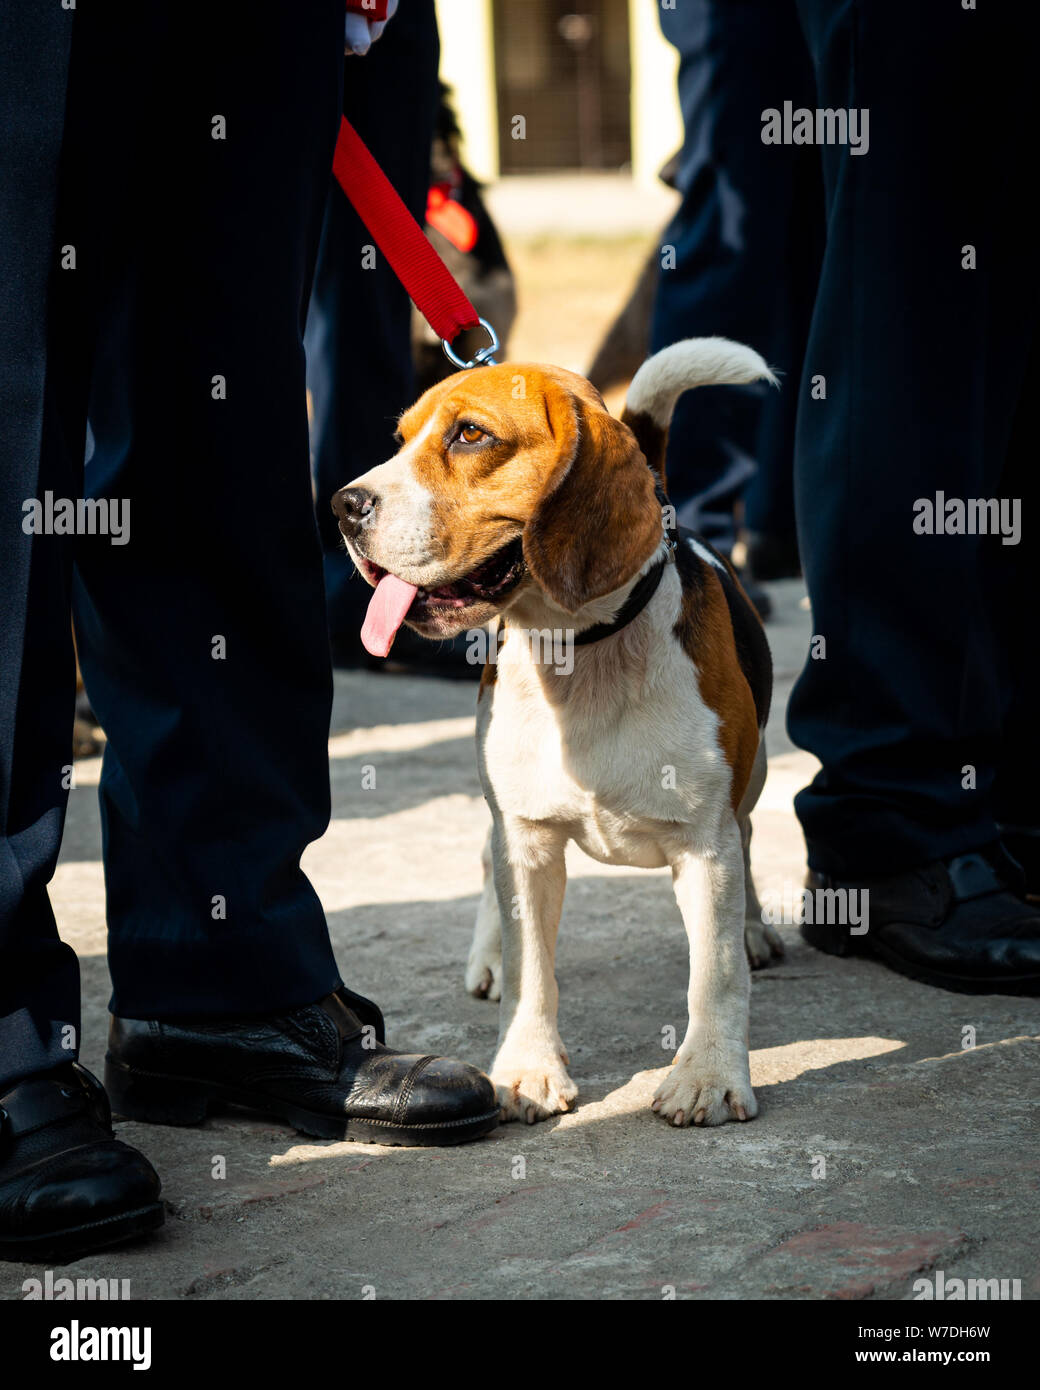 Beagle police dog. This breed is mostly used for search and rescue missions and as sniffer dogs. Stock Photo